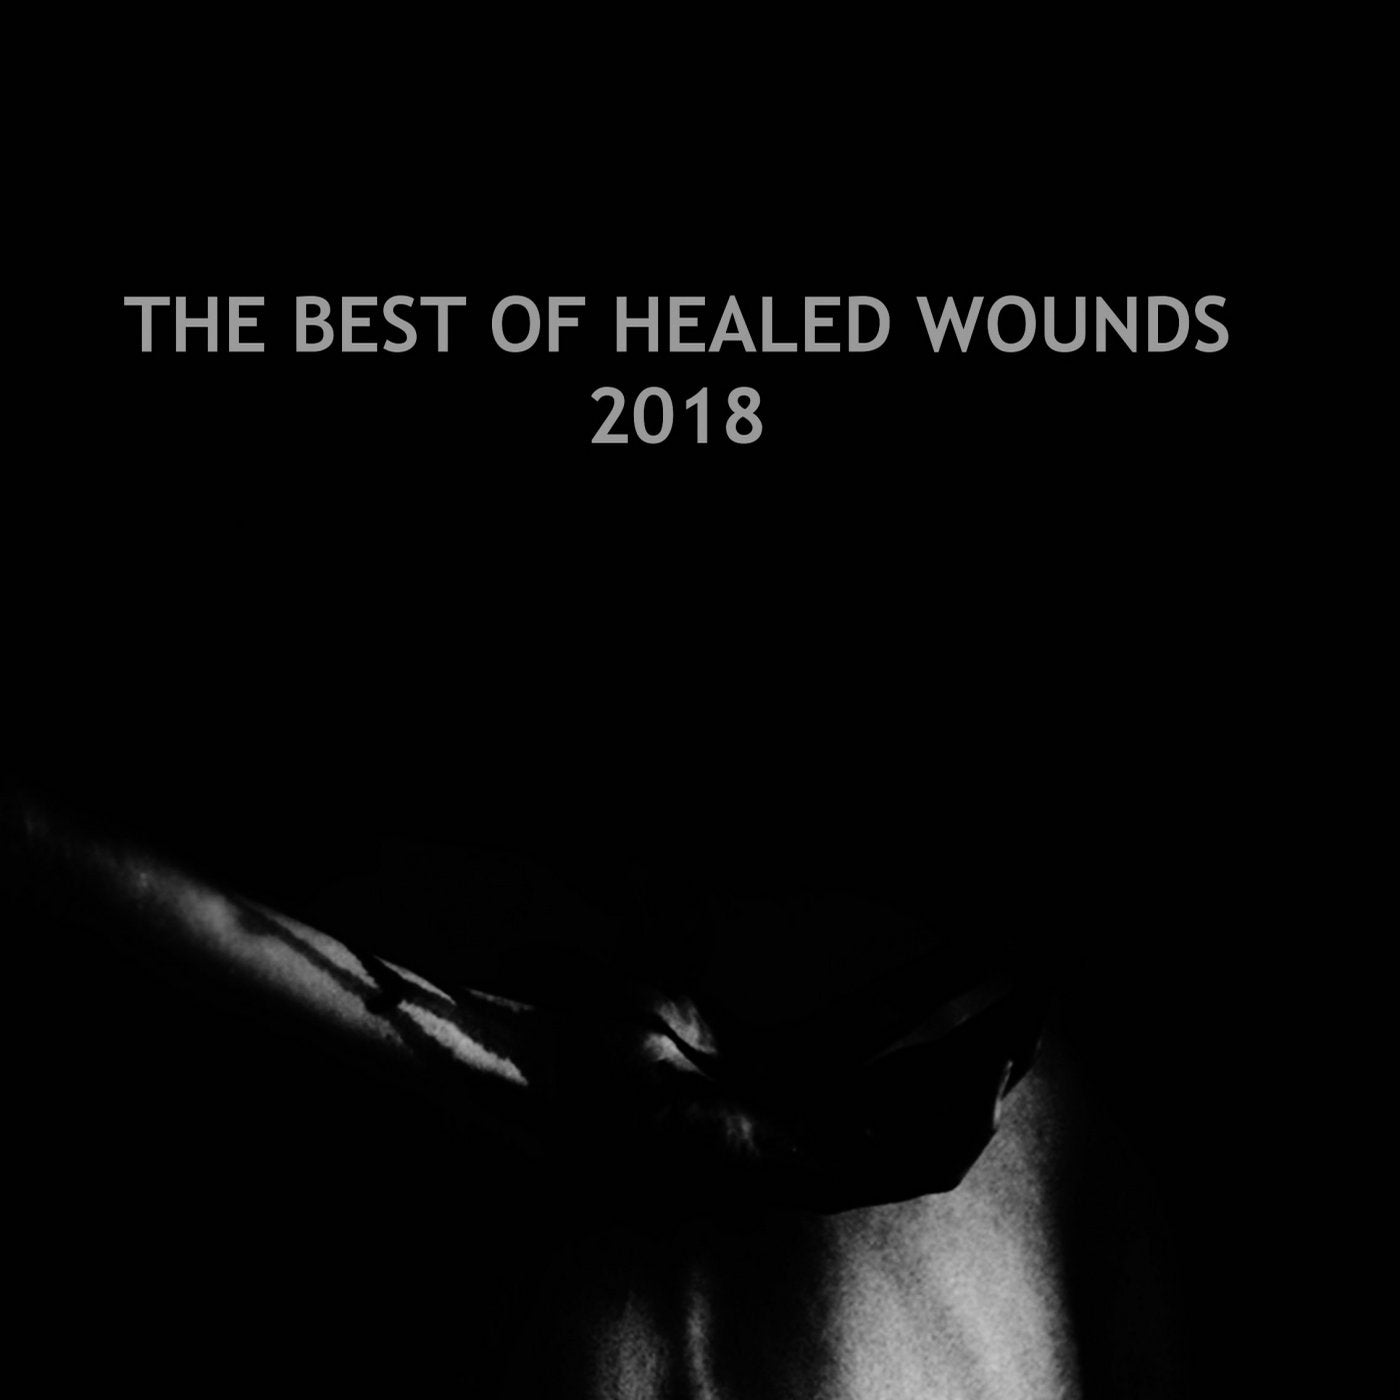 The Best Of Healed Wounds 2018